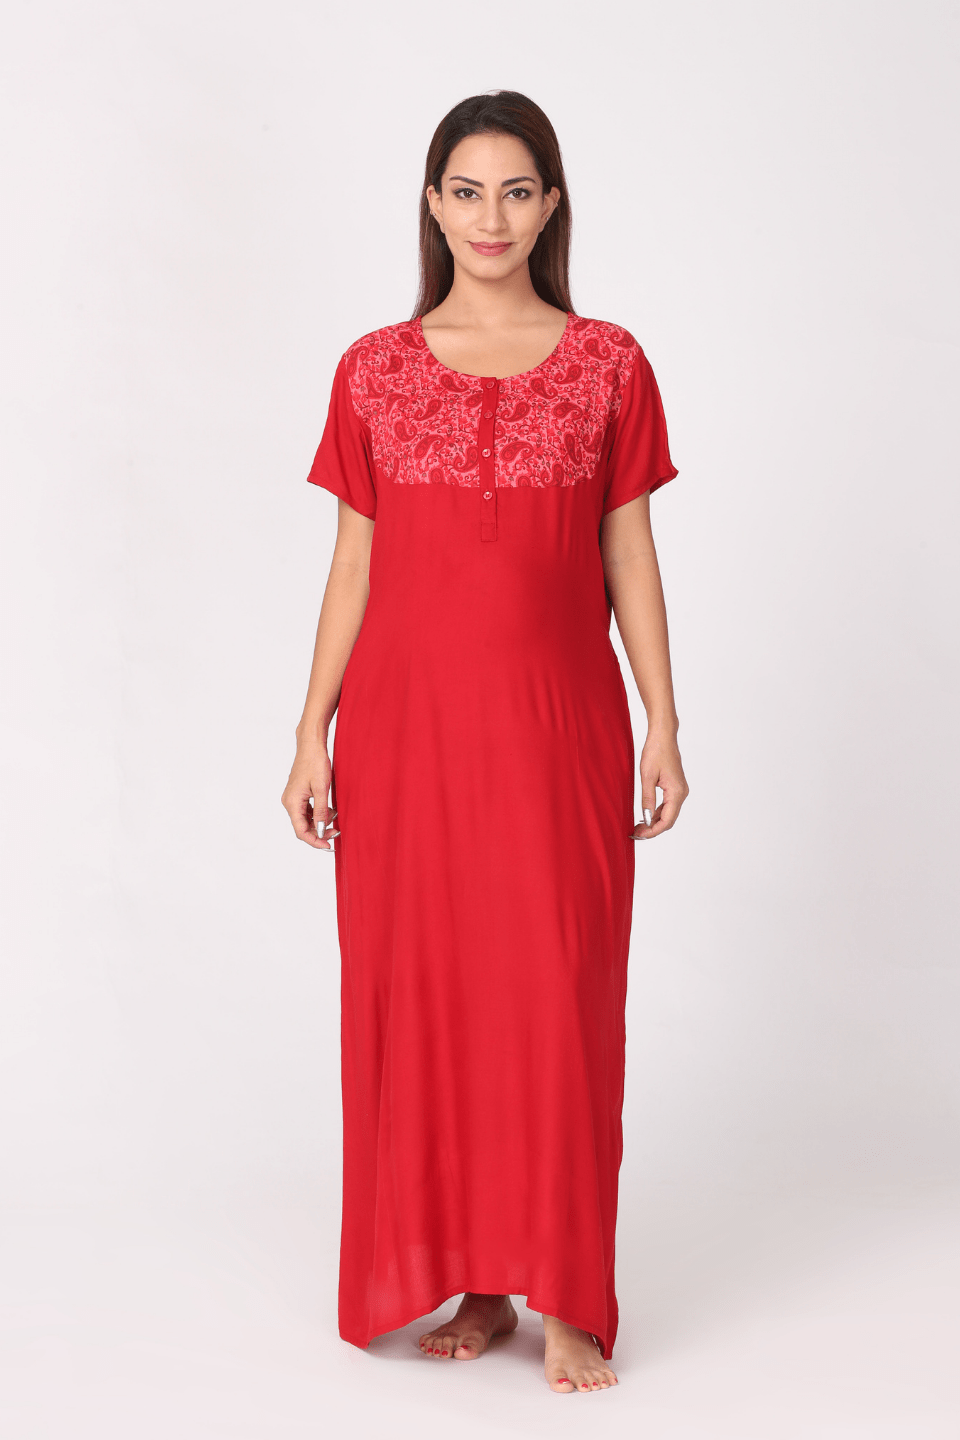 Morph Maternity Red Paisely Panel Feeding Gown